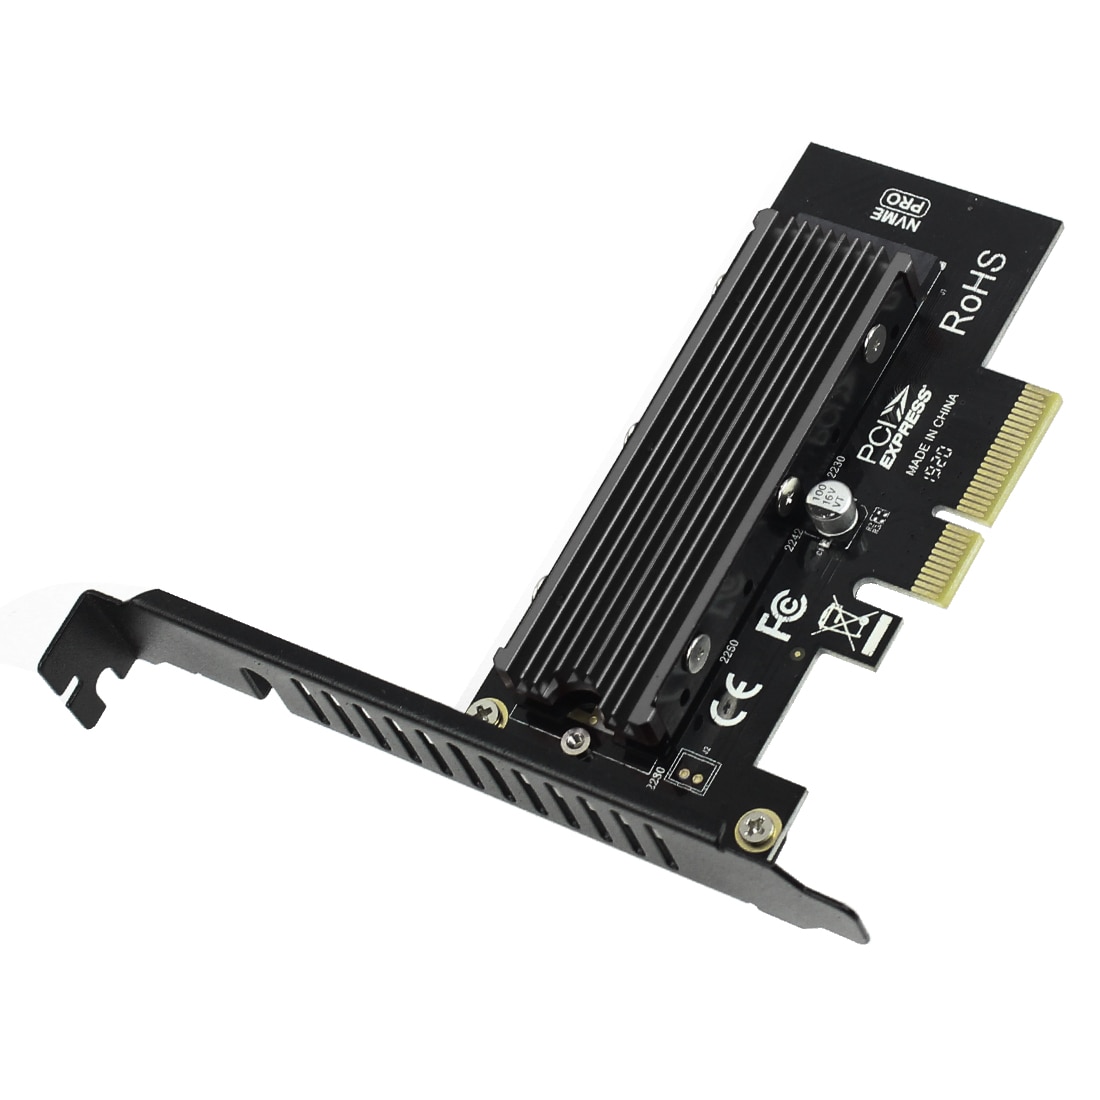 JEYI Combo Cooling Warship for Nvme Heatsink + SK4 m.2 SSD to PCIE 3.0 X4 Adapter Card M Key Support PCI Express PCI-e X8 X16